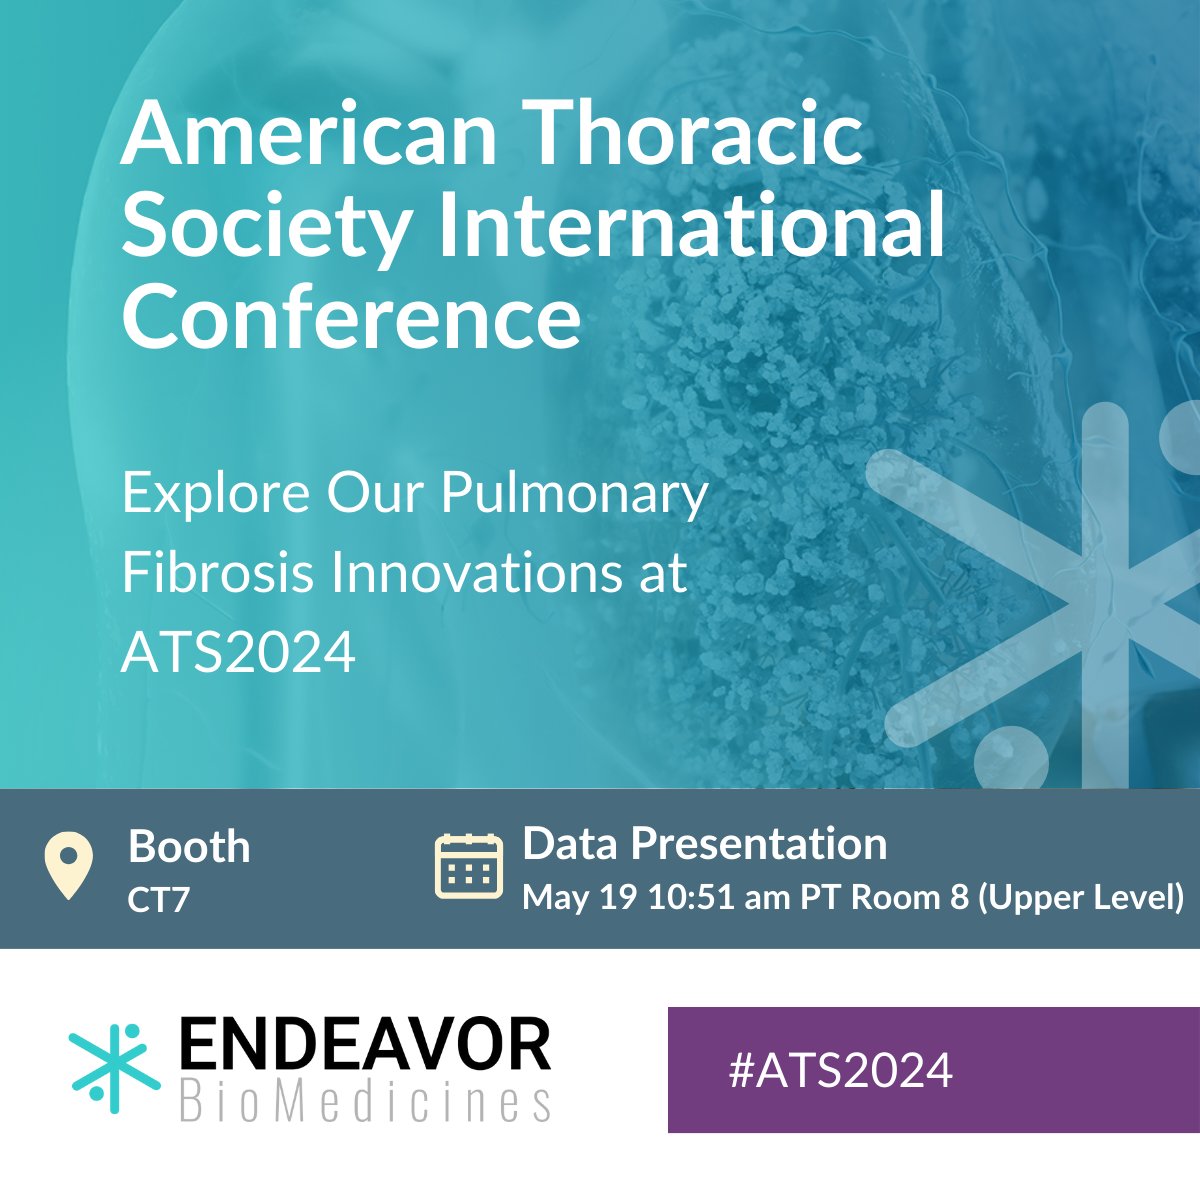 We’re looking forward to sharing new data at @atscommunity International Conference (#ATS2024) on our development candidate for idiopathic #pulmonaryfibrosis (#IPF). Visit us at Booth CT7 or at our data presentation on May 19: bit.ly/4aXFRCX